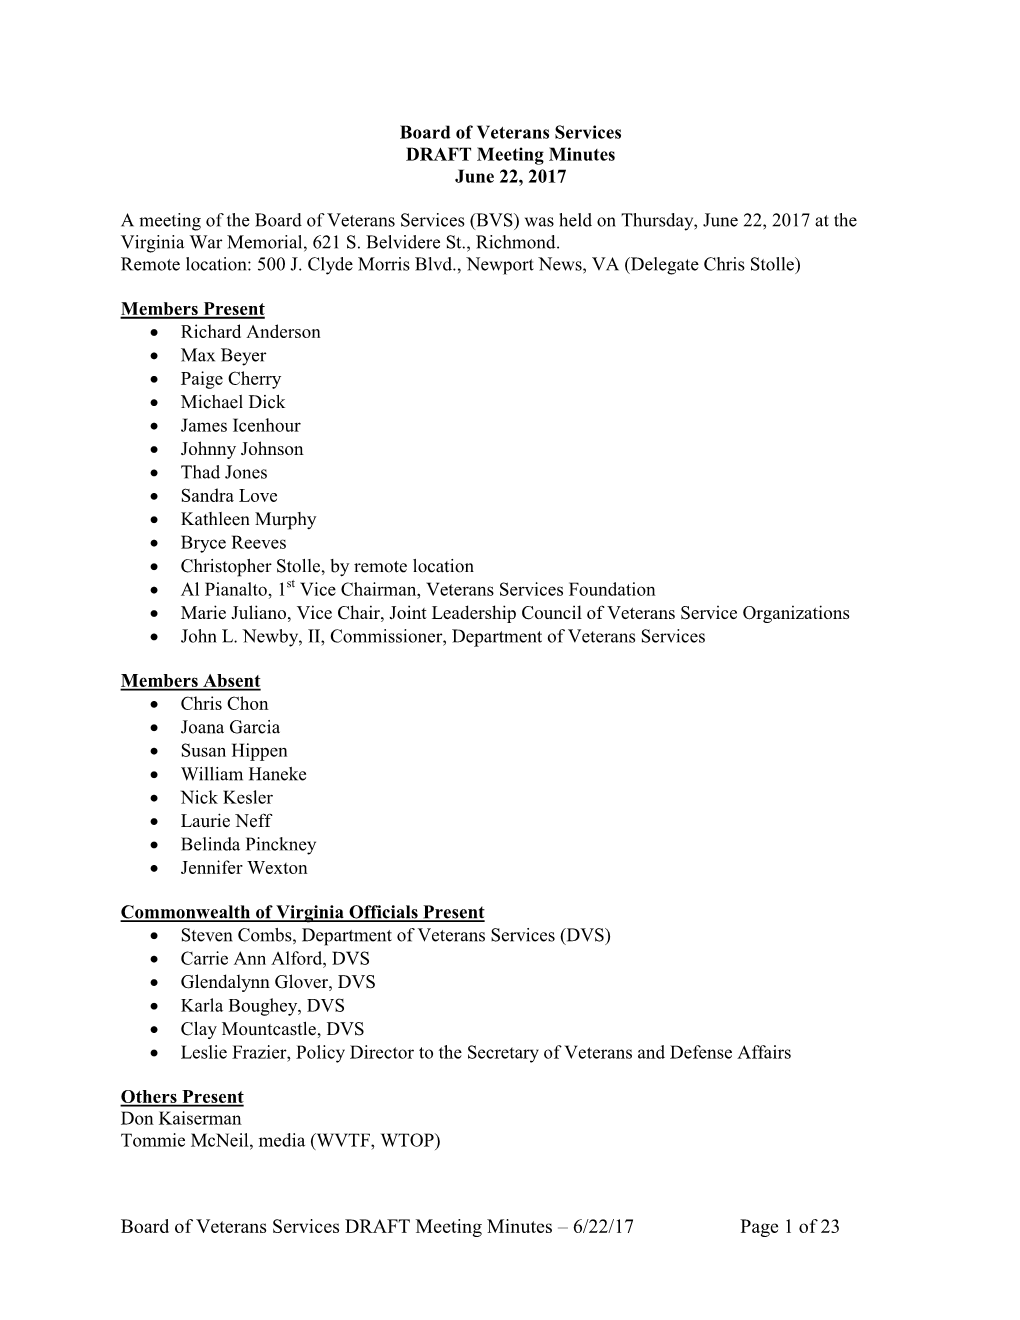 Board of Veterans Services DRAFT Meeting Minutes June 22, 2017